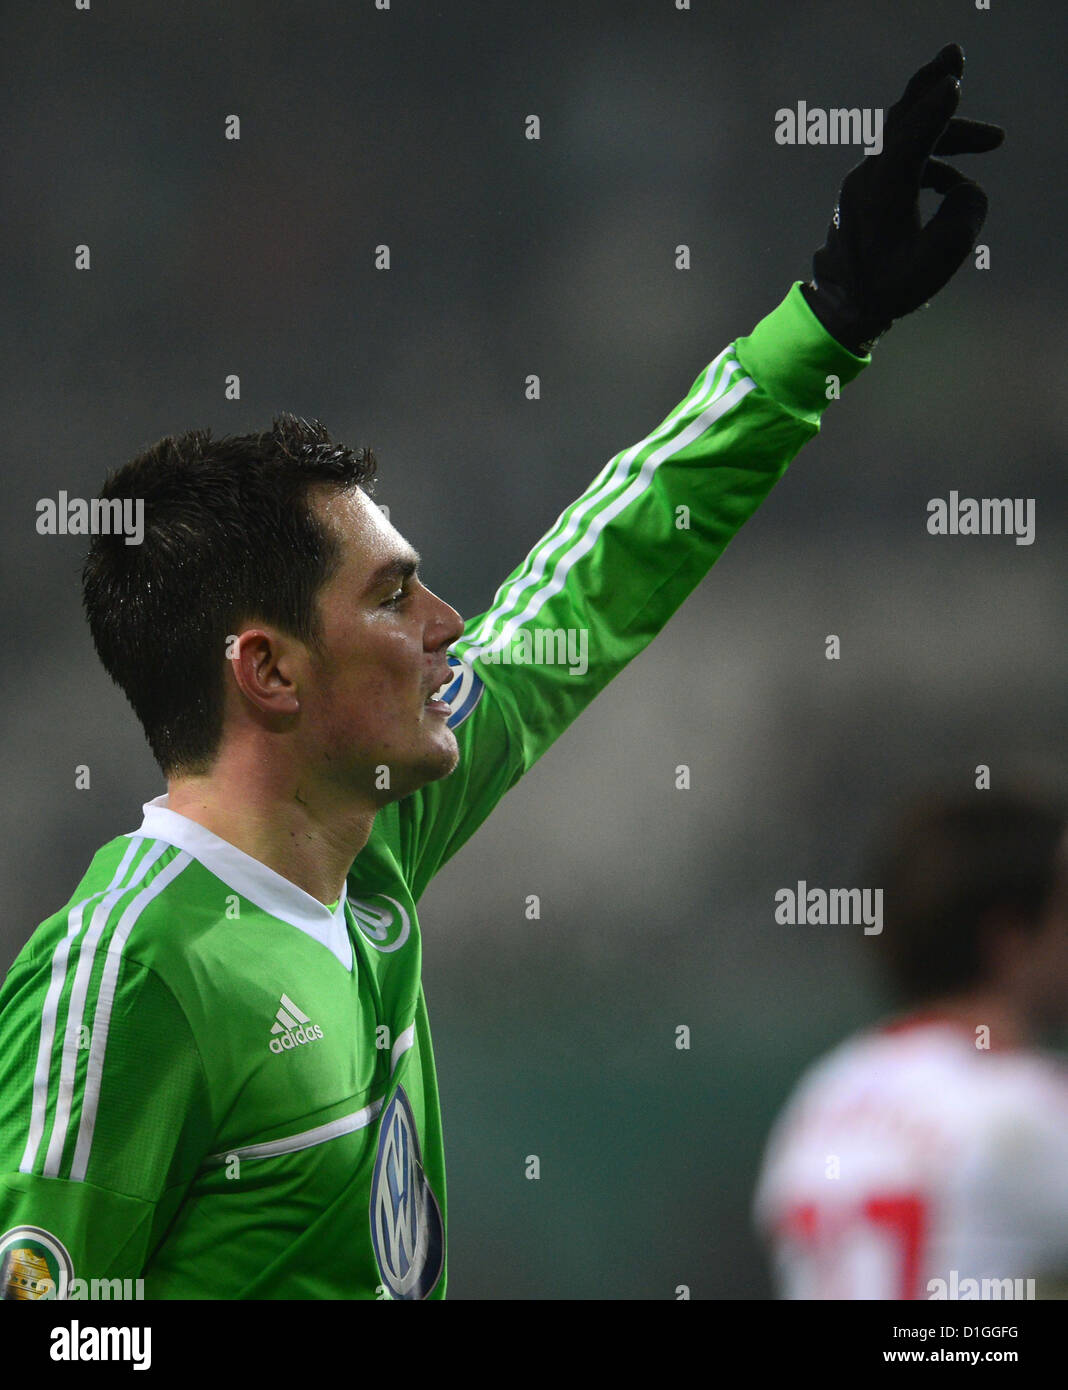 Wolfsburg's Marcel Schaefer gestures during the round of the last 16 DFB Cup match between VfL Wolfsburg and Bayer Leverkusen at Volkswagen Arena in Wolfsburg, Germany, 19 December 2012. Photo: PETER STEFFEN (ATTENTION: The DFB prohibits the utilisation and publication of sequential pictures on the internet and other online media during the match (including half-time). ATTENTION: BLOCKING PERIOD! The DFB permits the further utilisation and publication of the pictures for mobile services (especially MMS) and for DVB-H and DMB only after the end of the match.) Stock Photo